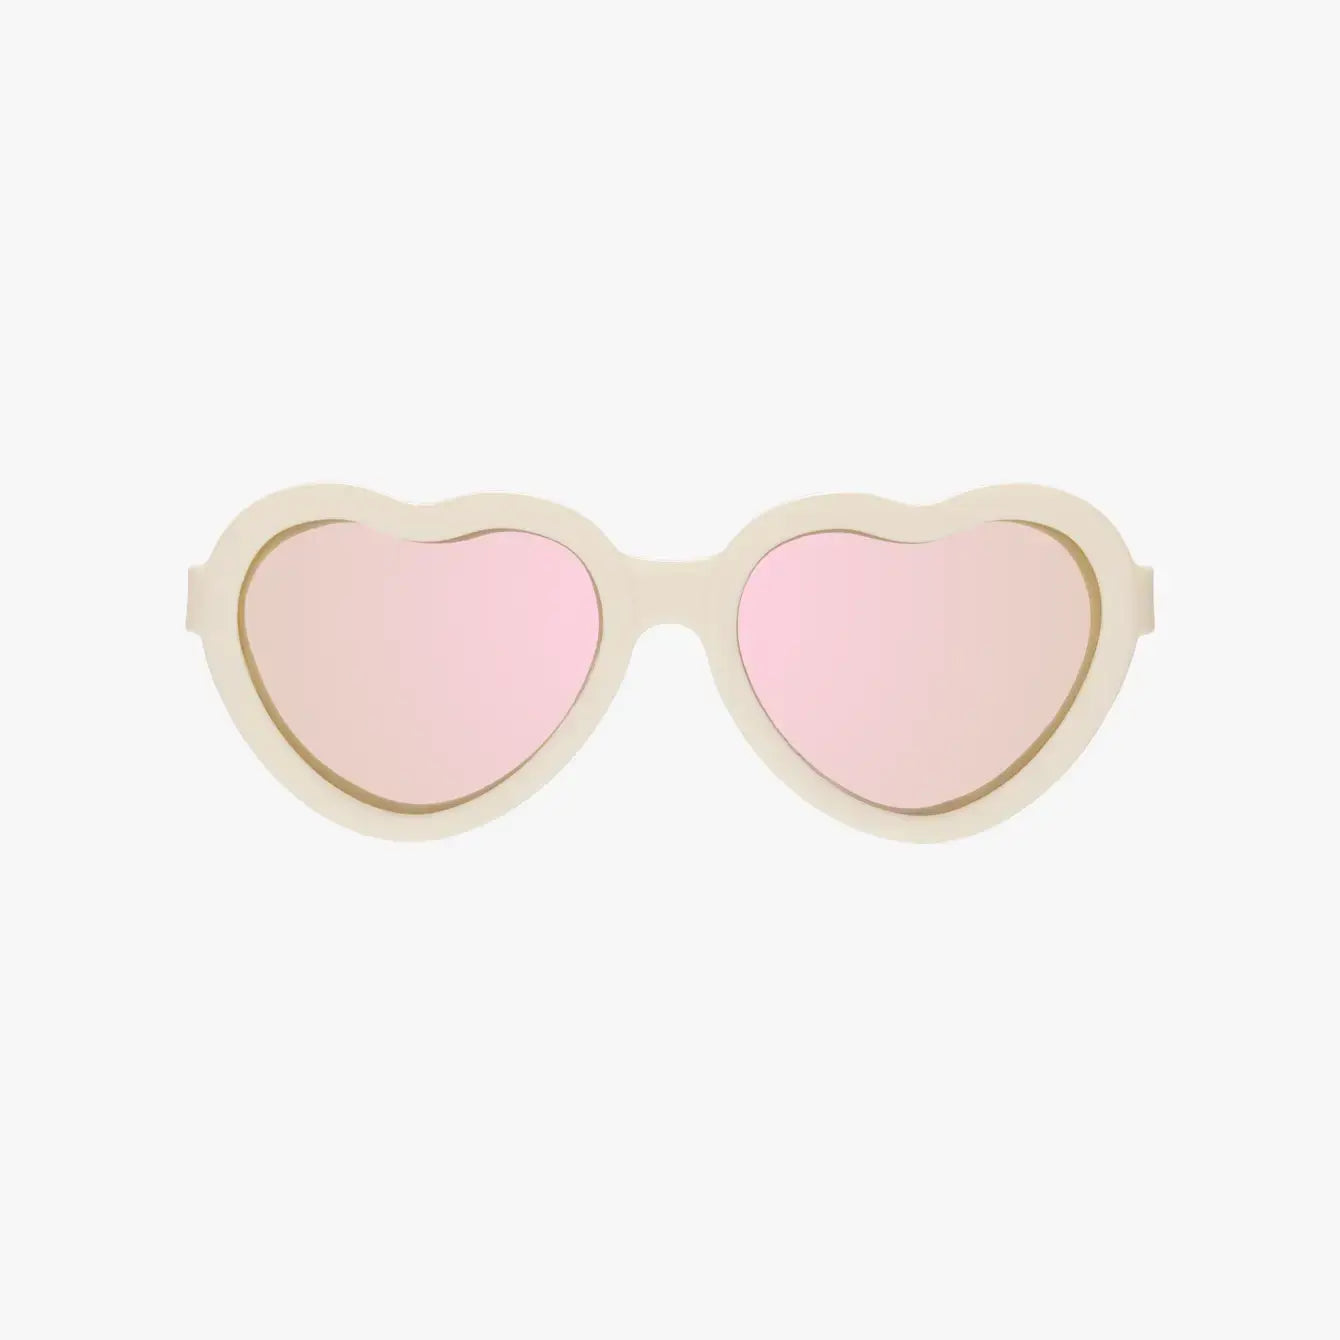 Babiators - Polarized Heart Sunglasses: Ages 6+ / Frosted Pink